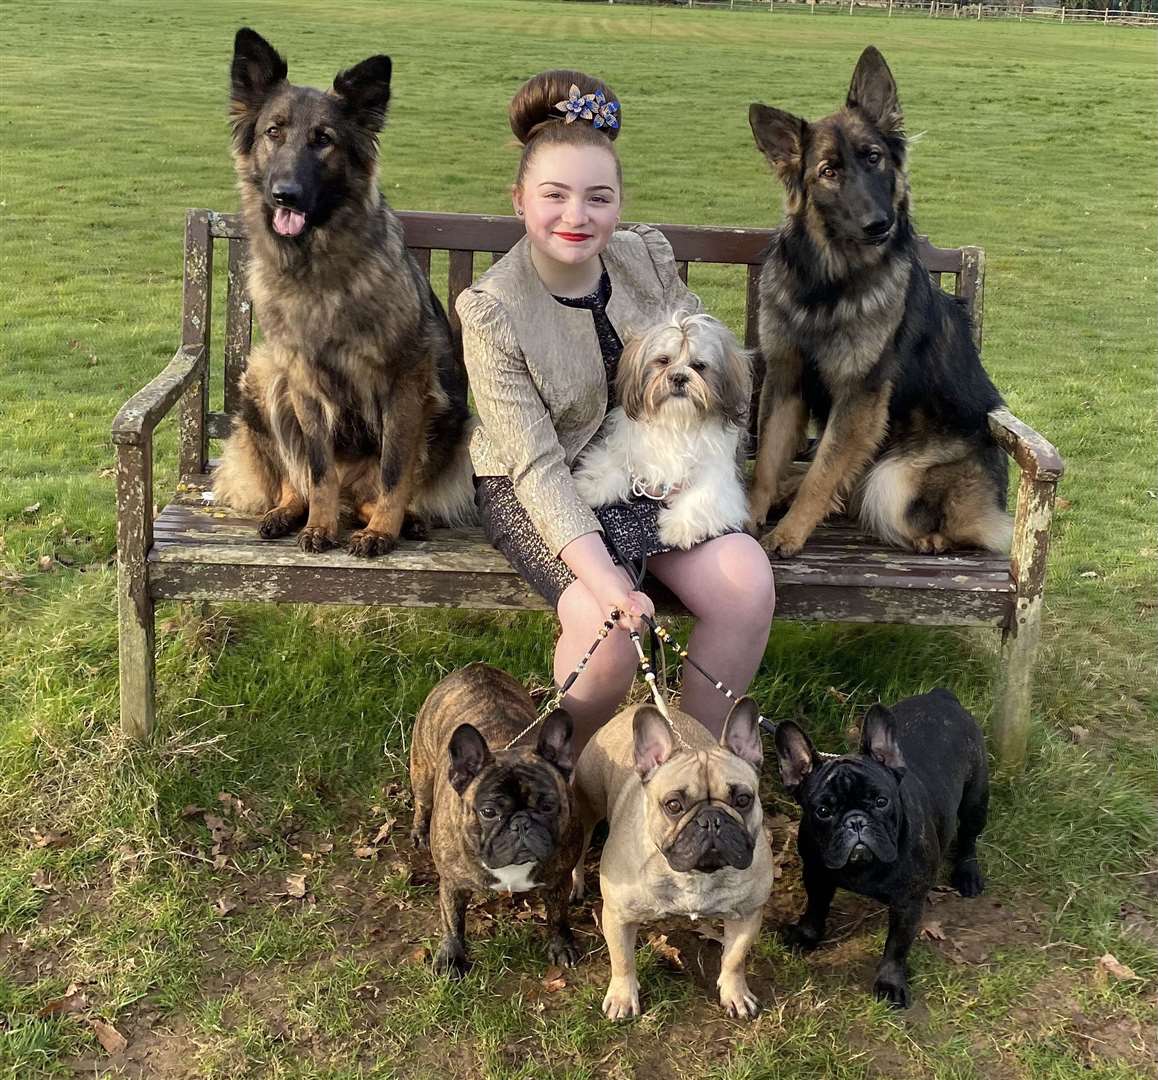 Ellissia East-Hickman from Marden with the 6 dogs she will be showing at Crufts - German Shepherds Sheera, left, and Sable, right, Shih Tzu Pebbles, French Bulldogs Nala, left, and Cymbar, middle, and Voodoo , to the right.  Photo: Animal News Agency